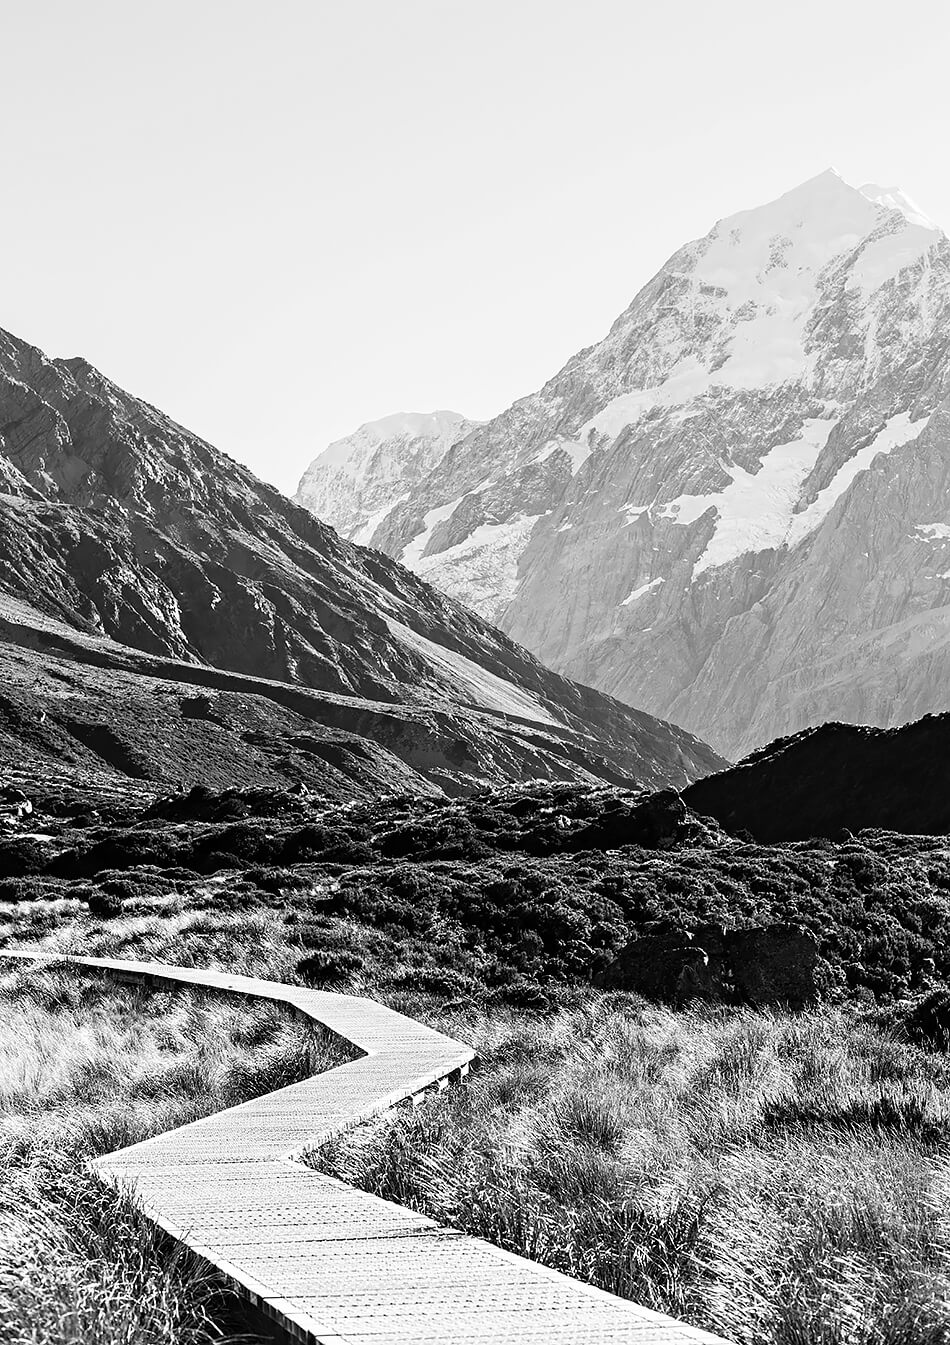 black and white print home interior monochrome interior print new zealand photography mount cook